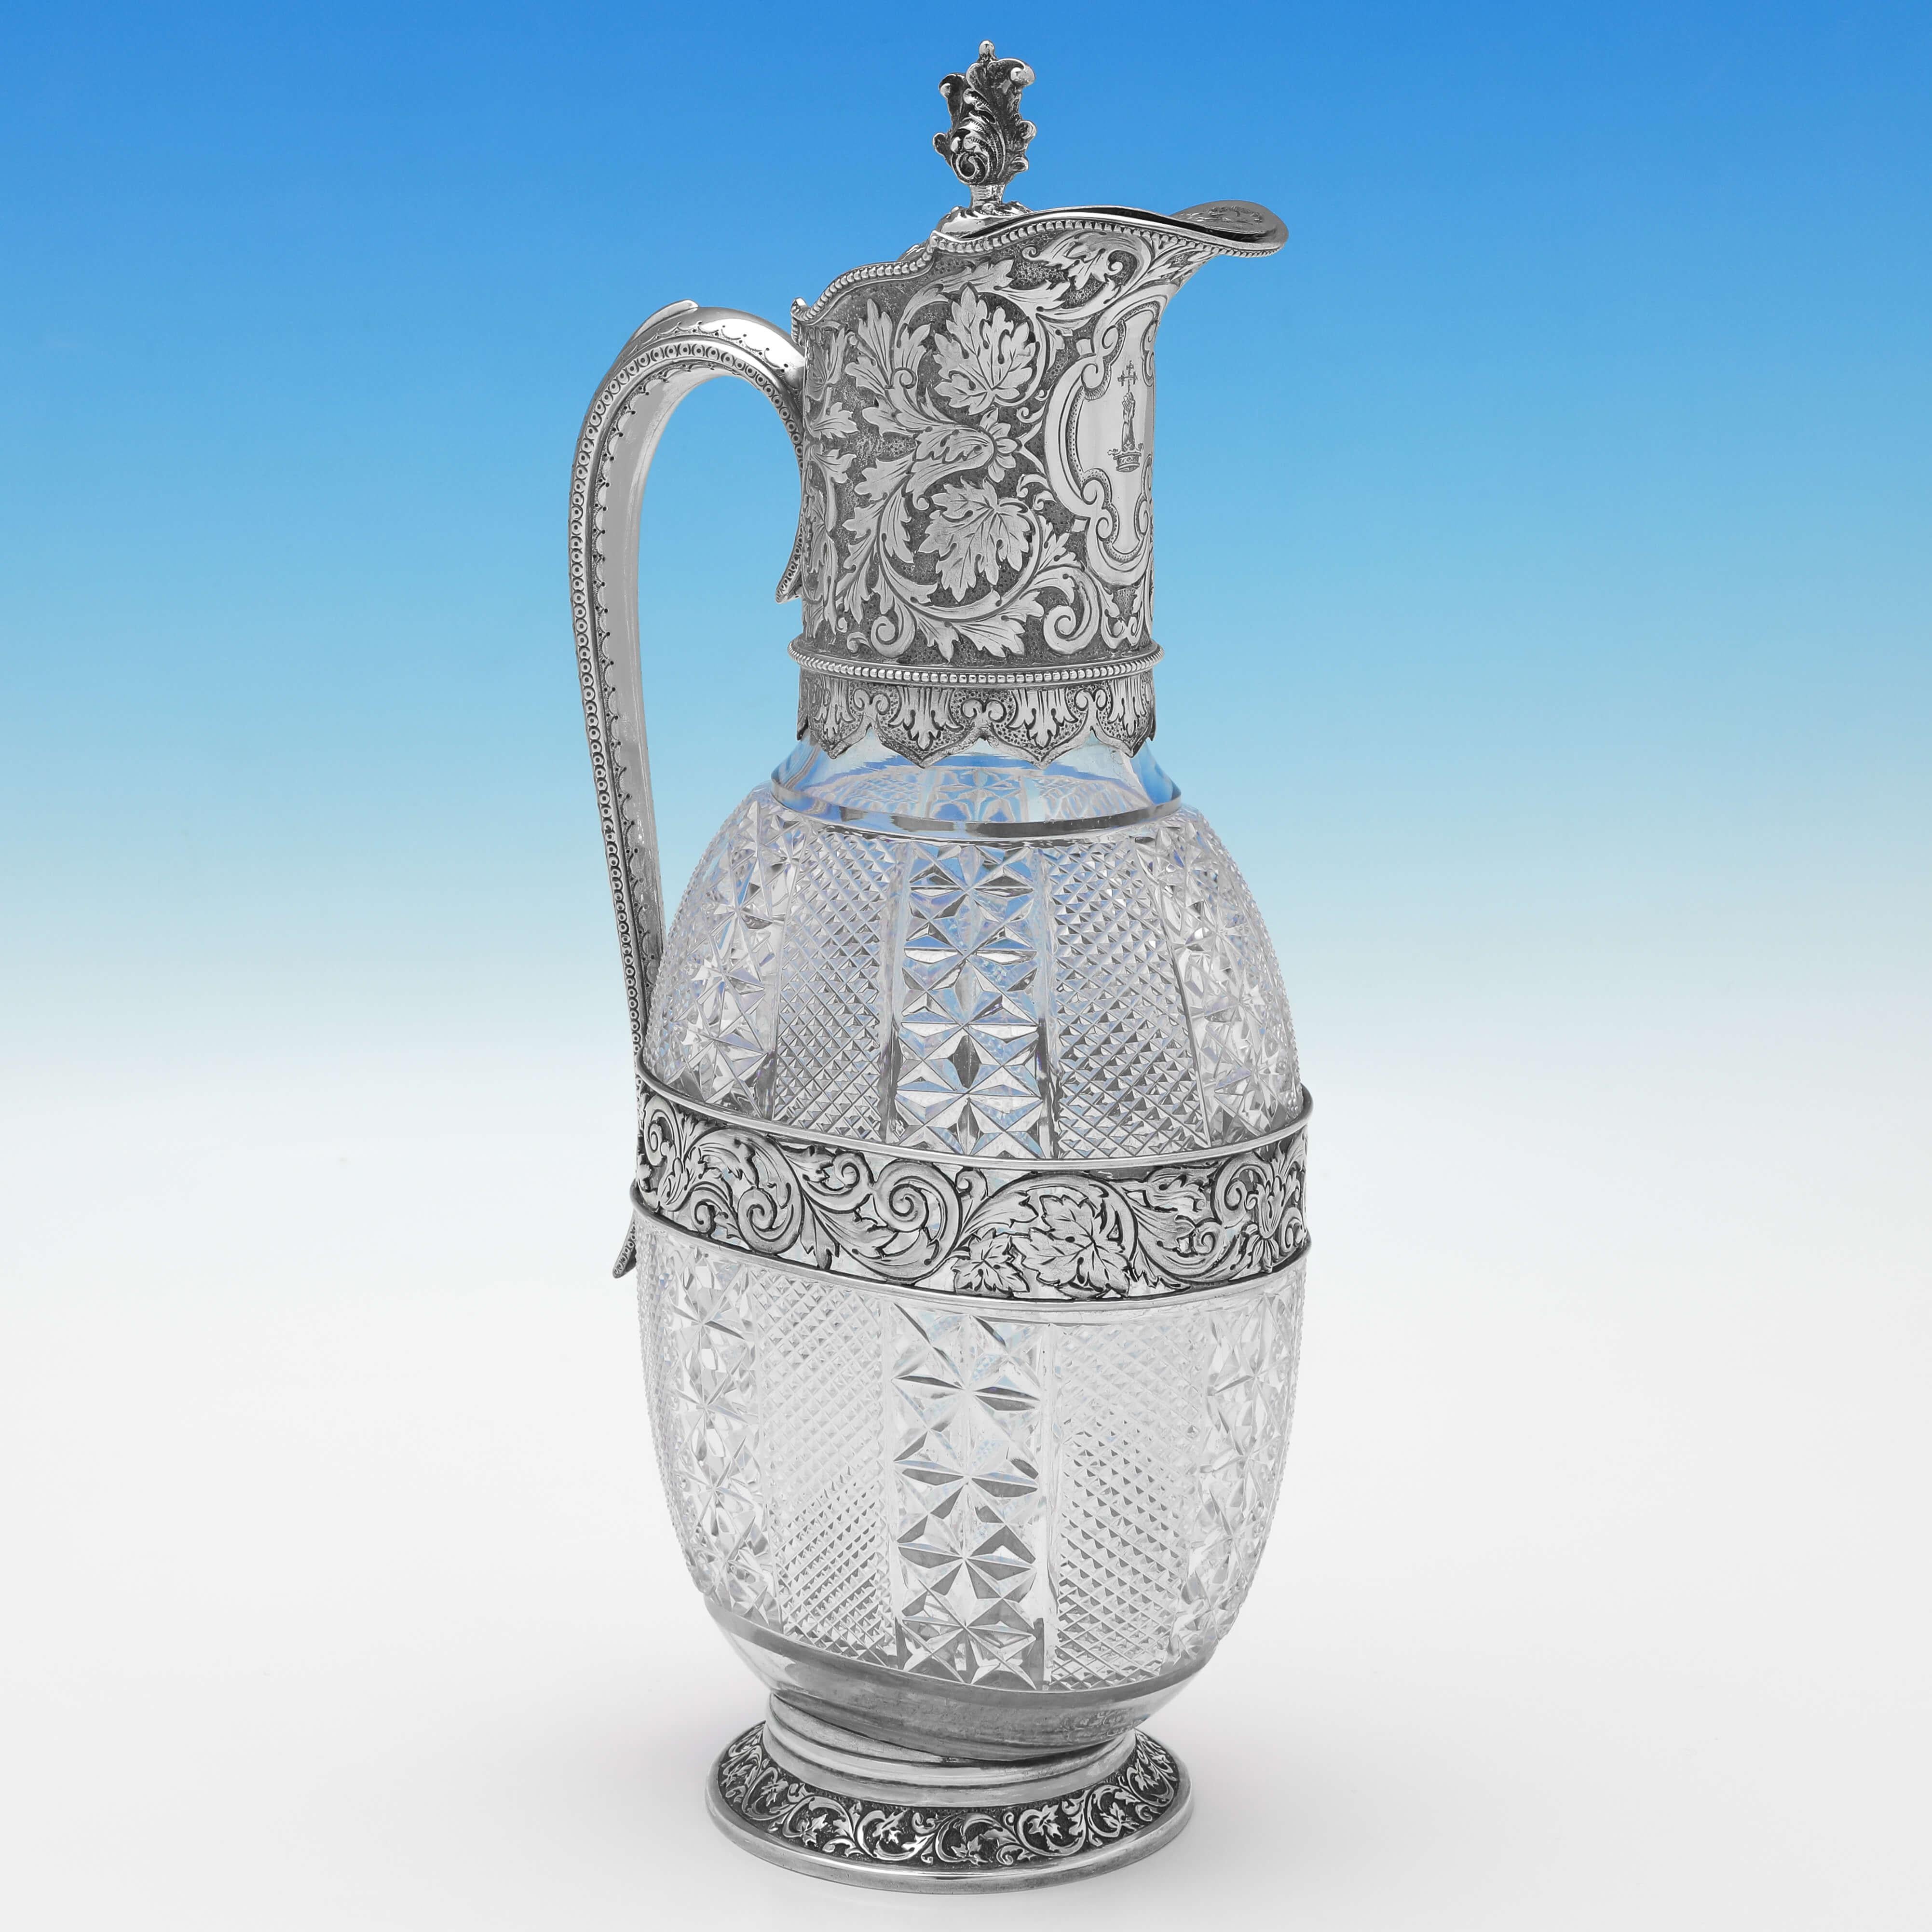 Hallmarked in London in 1889 by Edgar Finley & Hugh Taylor, this stunning pair of Antique Sterling Silver Claret Jugs, are ornate in design, featuring wonderful decoration to the silver mounts, heavily cut glass bodies, and engraved crests to the